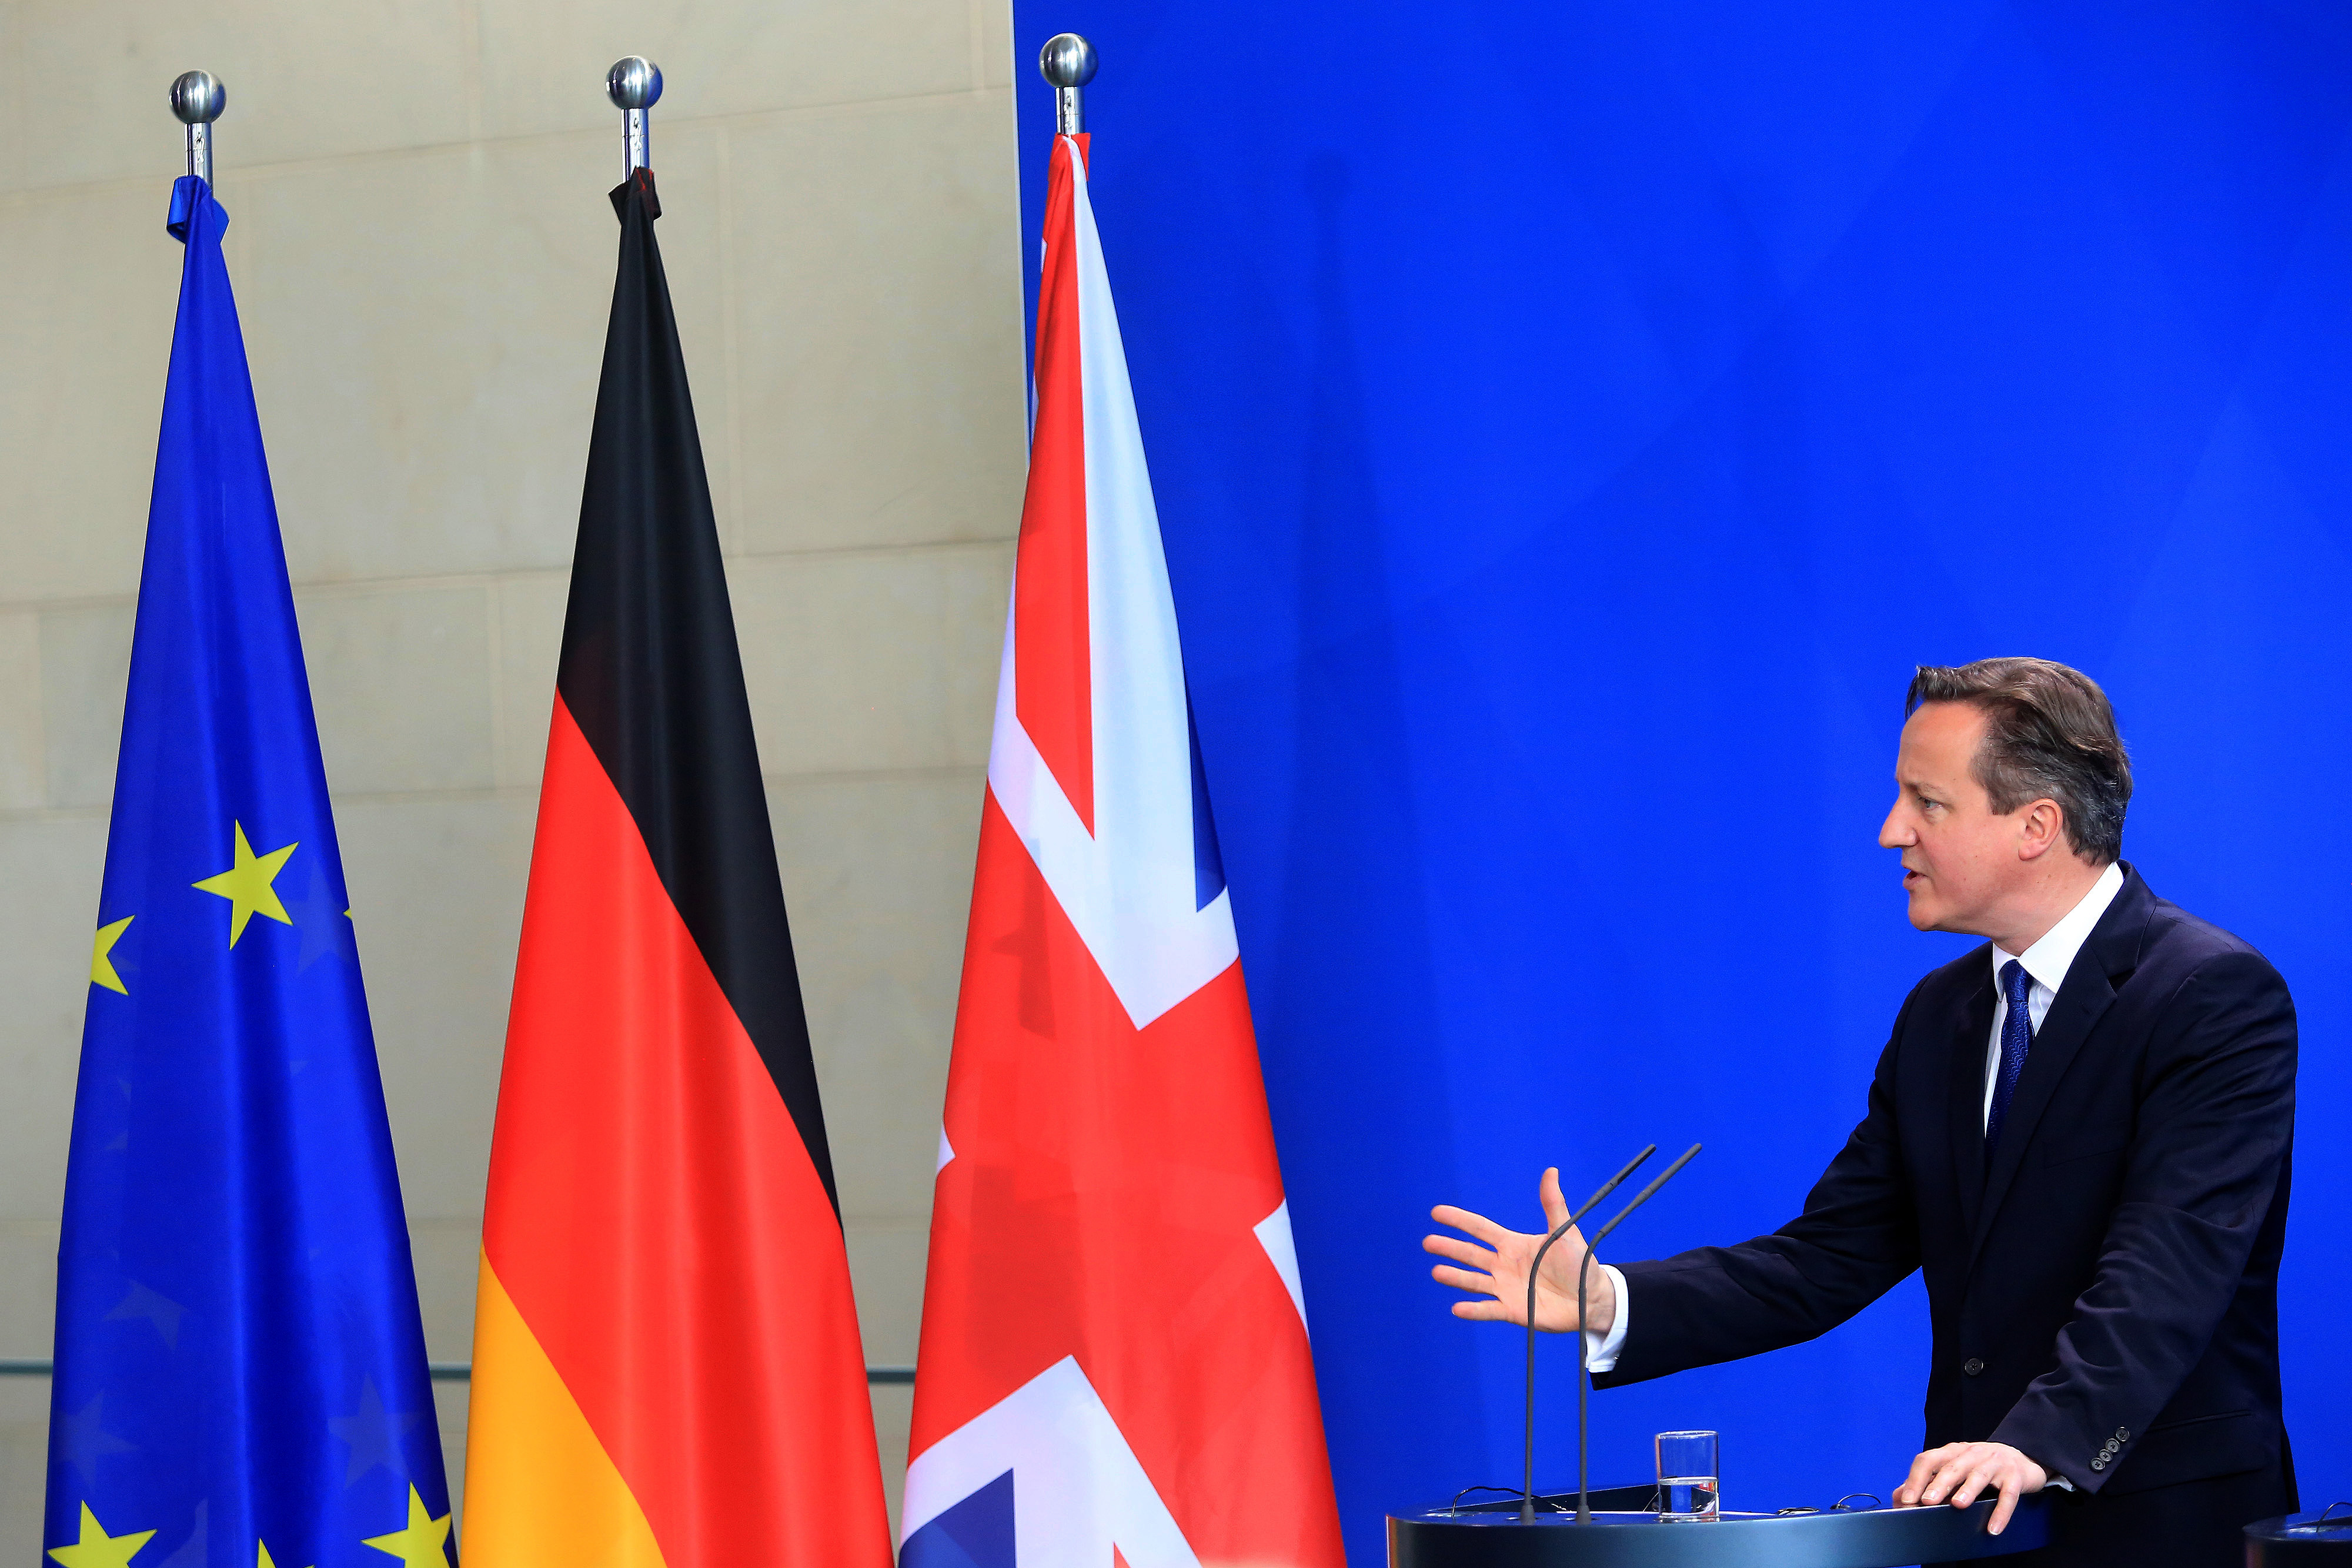 David Cameron, U.K. prime minister, gestures as he speaks during a news conference at the Chancellery in Berlin, Germany, on Friday, May 29, 2015. Chancellor Angela Merkel offered to help Cameron secure the changes he wants to Britain's relationship with the European Union, including the possibility of changing EU treaties if necessary (Bloomberg—Bloomberg via Getty Images)